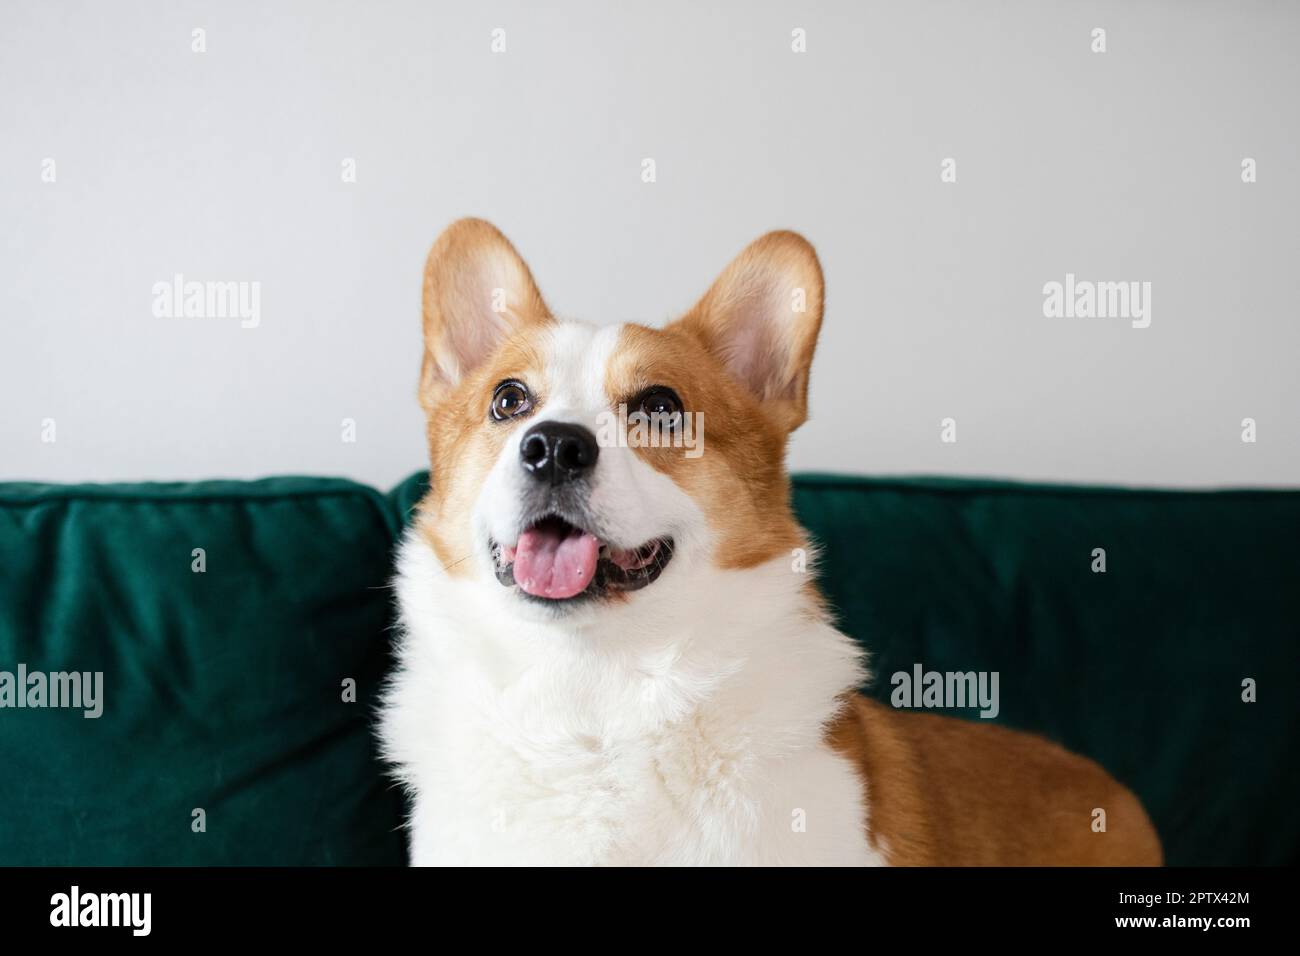 Portrait of a gorgeous purebred Welsh Pembroke Corgi dog on the green couch Stock Photo